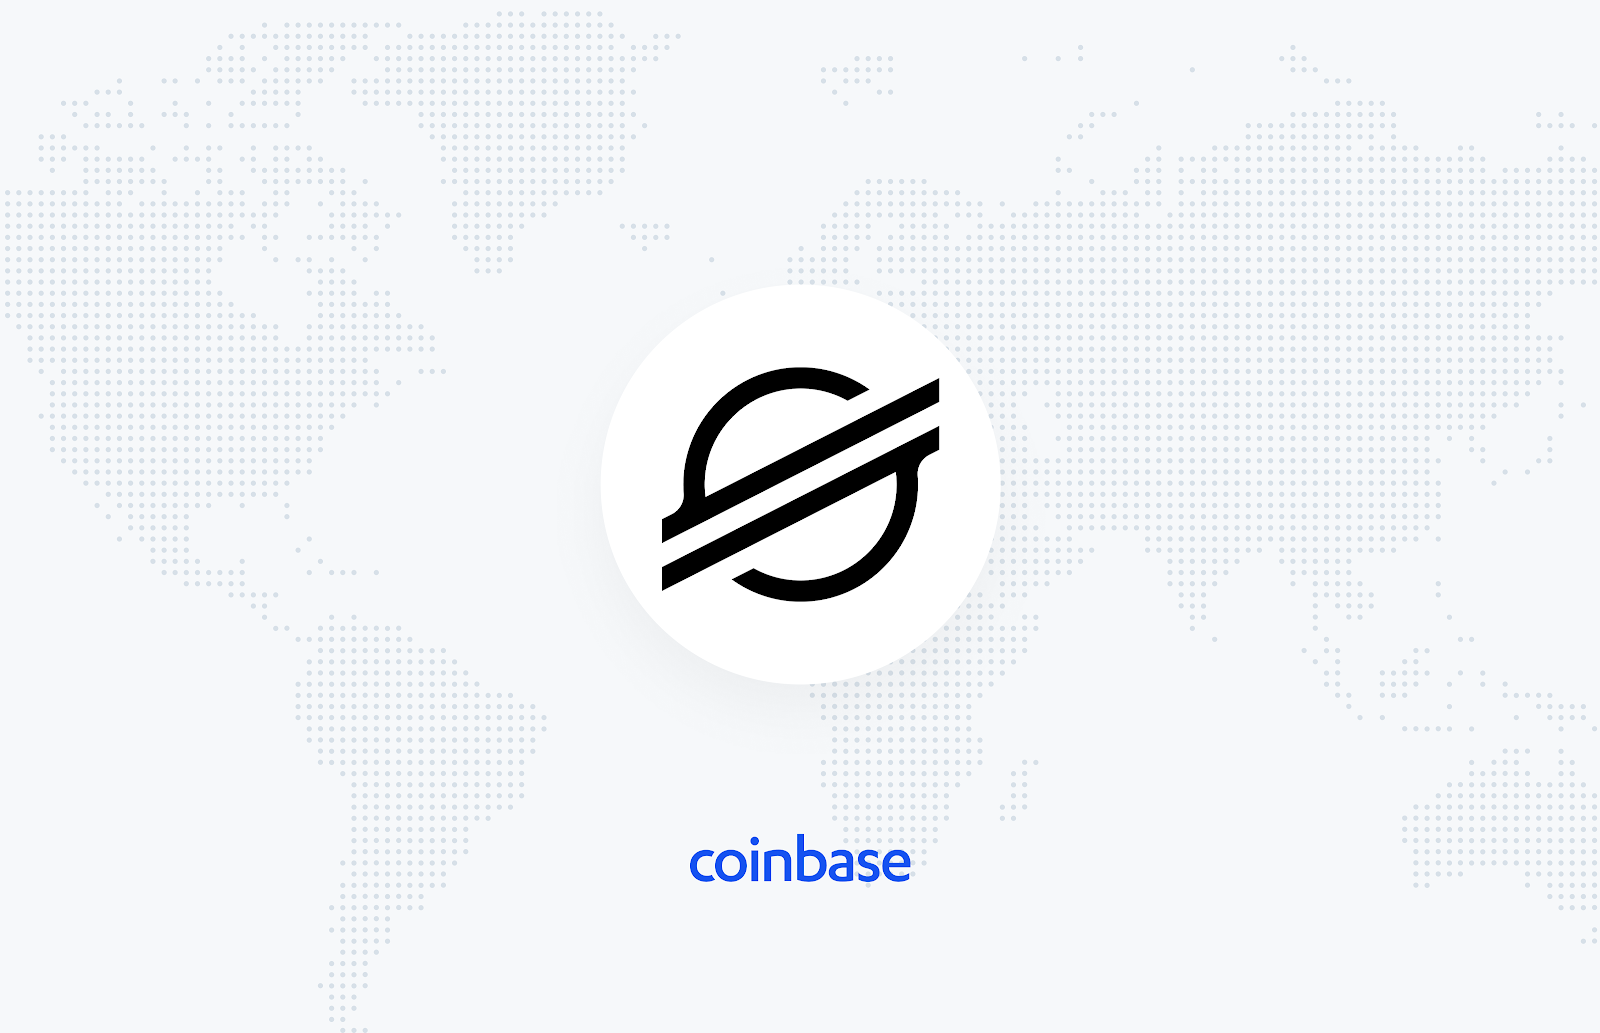 Coinbase Wallet Adds Support for Stellar Lumens (XLM) in Both iOS and Android Versions